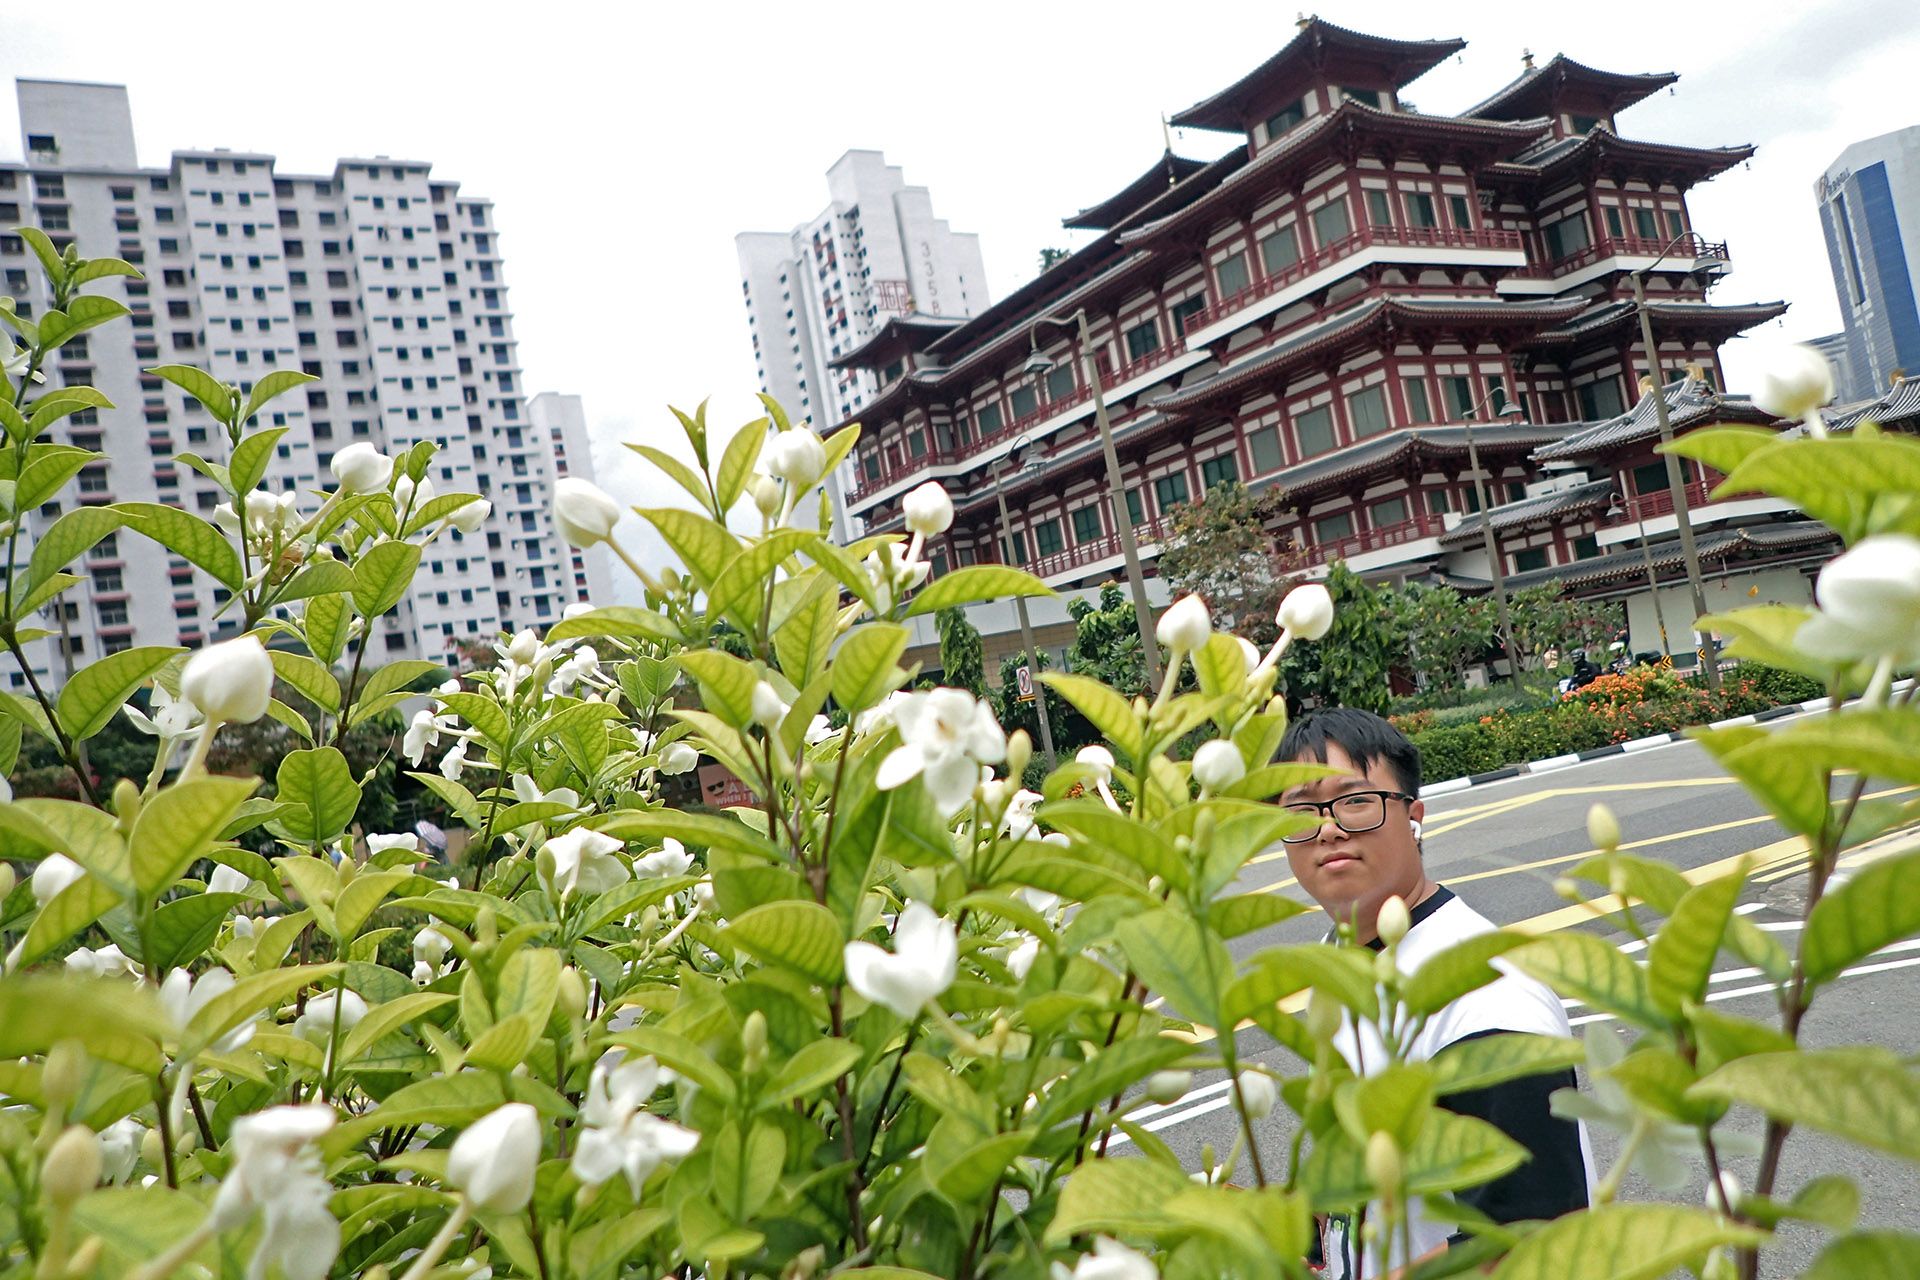 A flowering walidda near Maxwell Food Centre on March 1. The plant has white fragrant five-petaled flowers with a yellow centre. ST PHOTO: NEO XIAOBIN